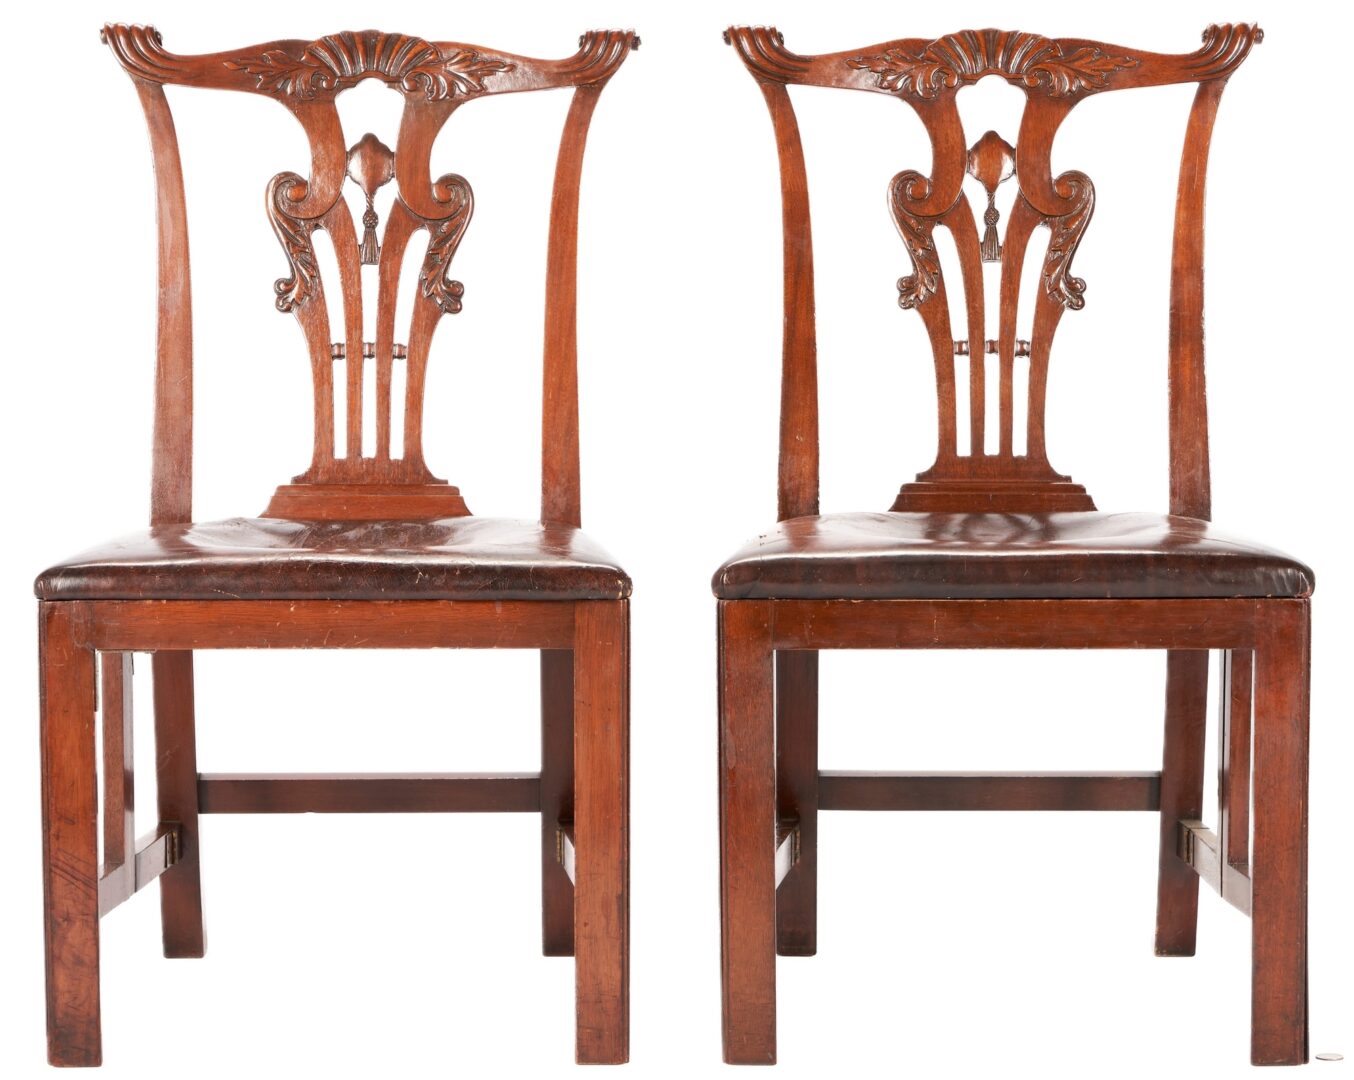 Lot 469: Rare Pair of British Concertina Action Chairs, possibly Naval Campaign